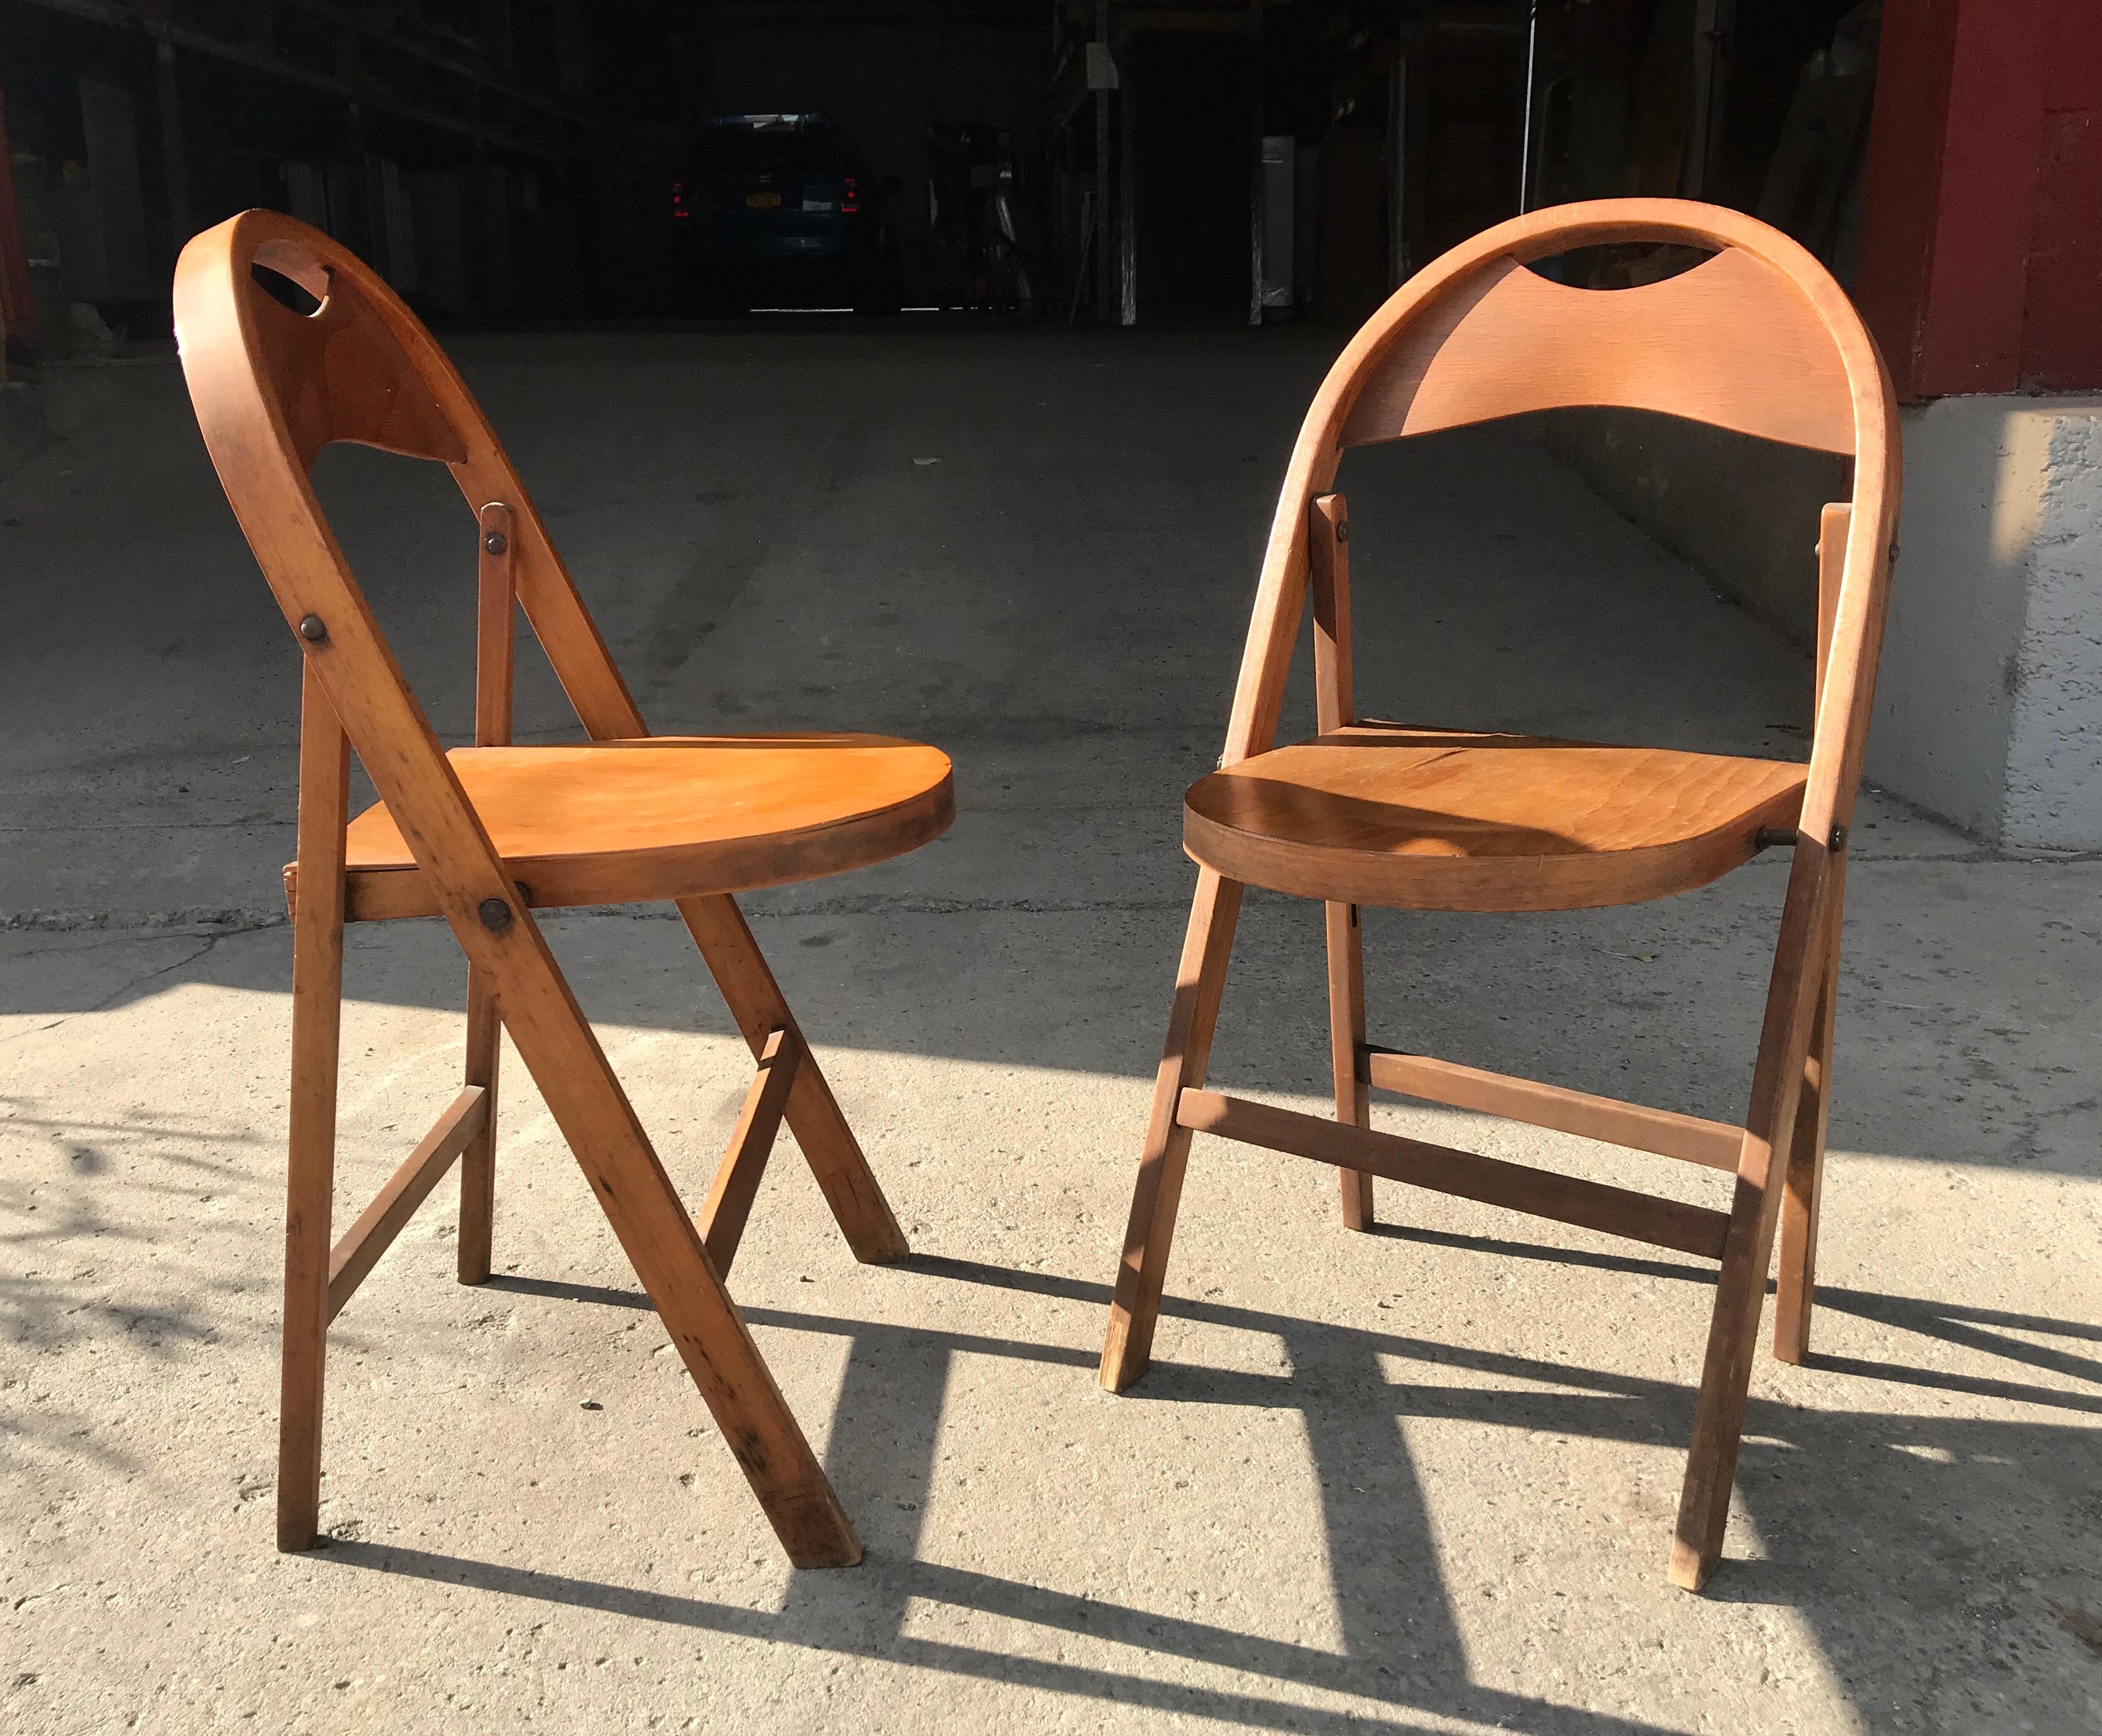 Set of 10 Bauhaus folding chairs by Thonet, nice set, amazing quality and construction, wonderful color, patina.